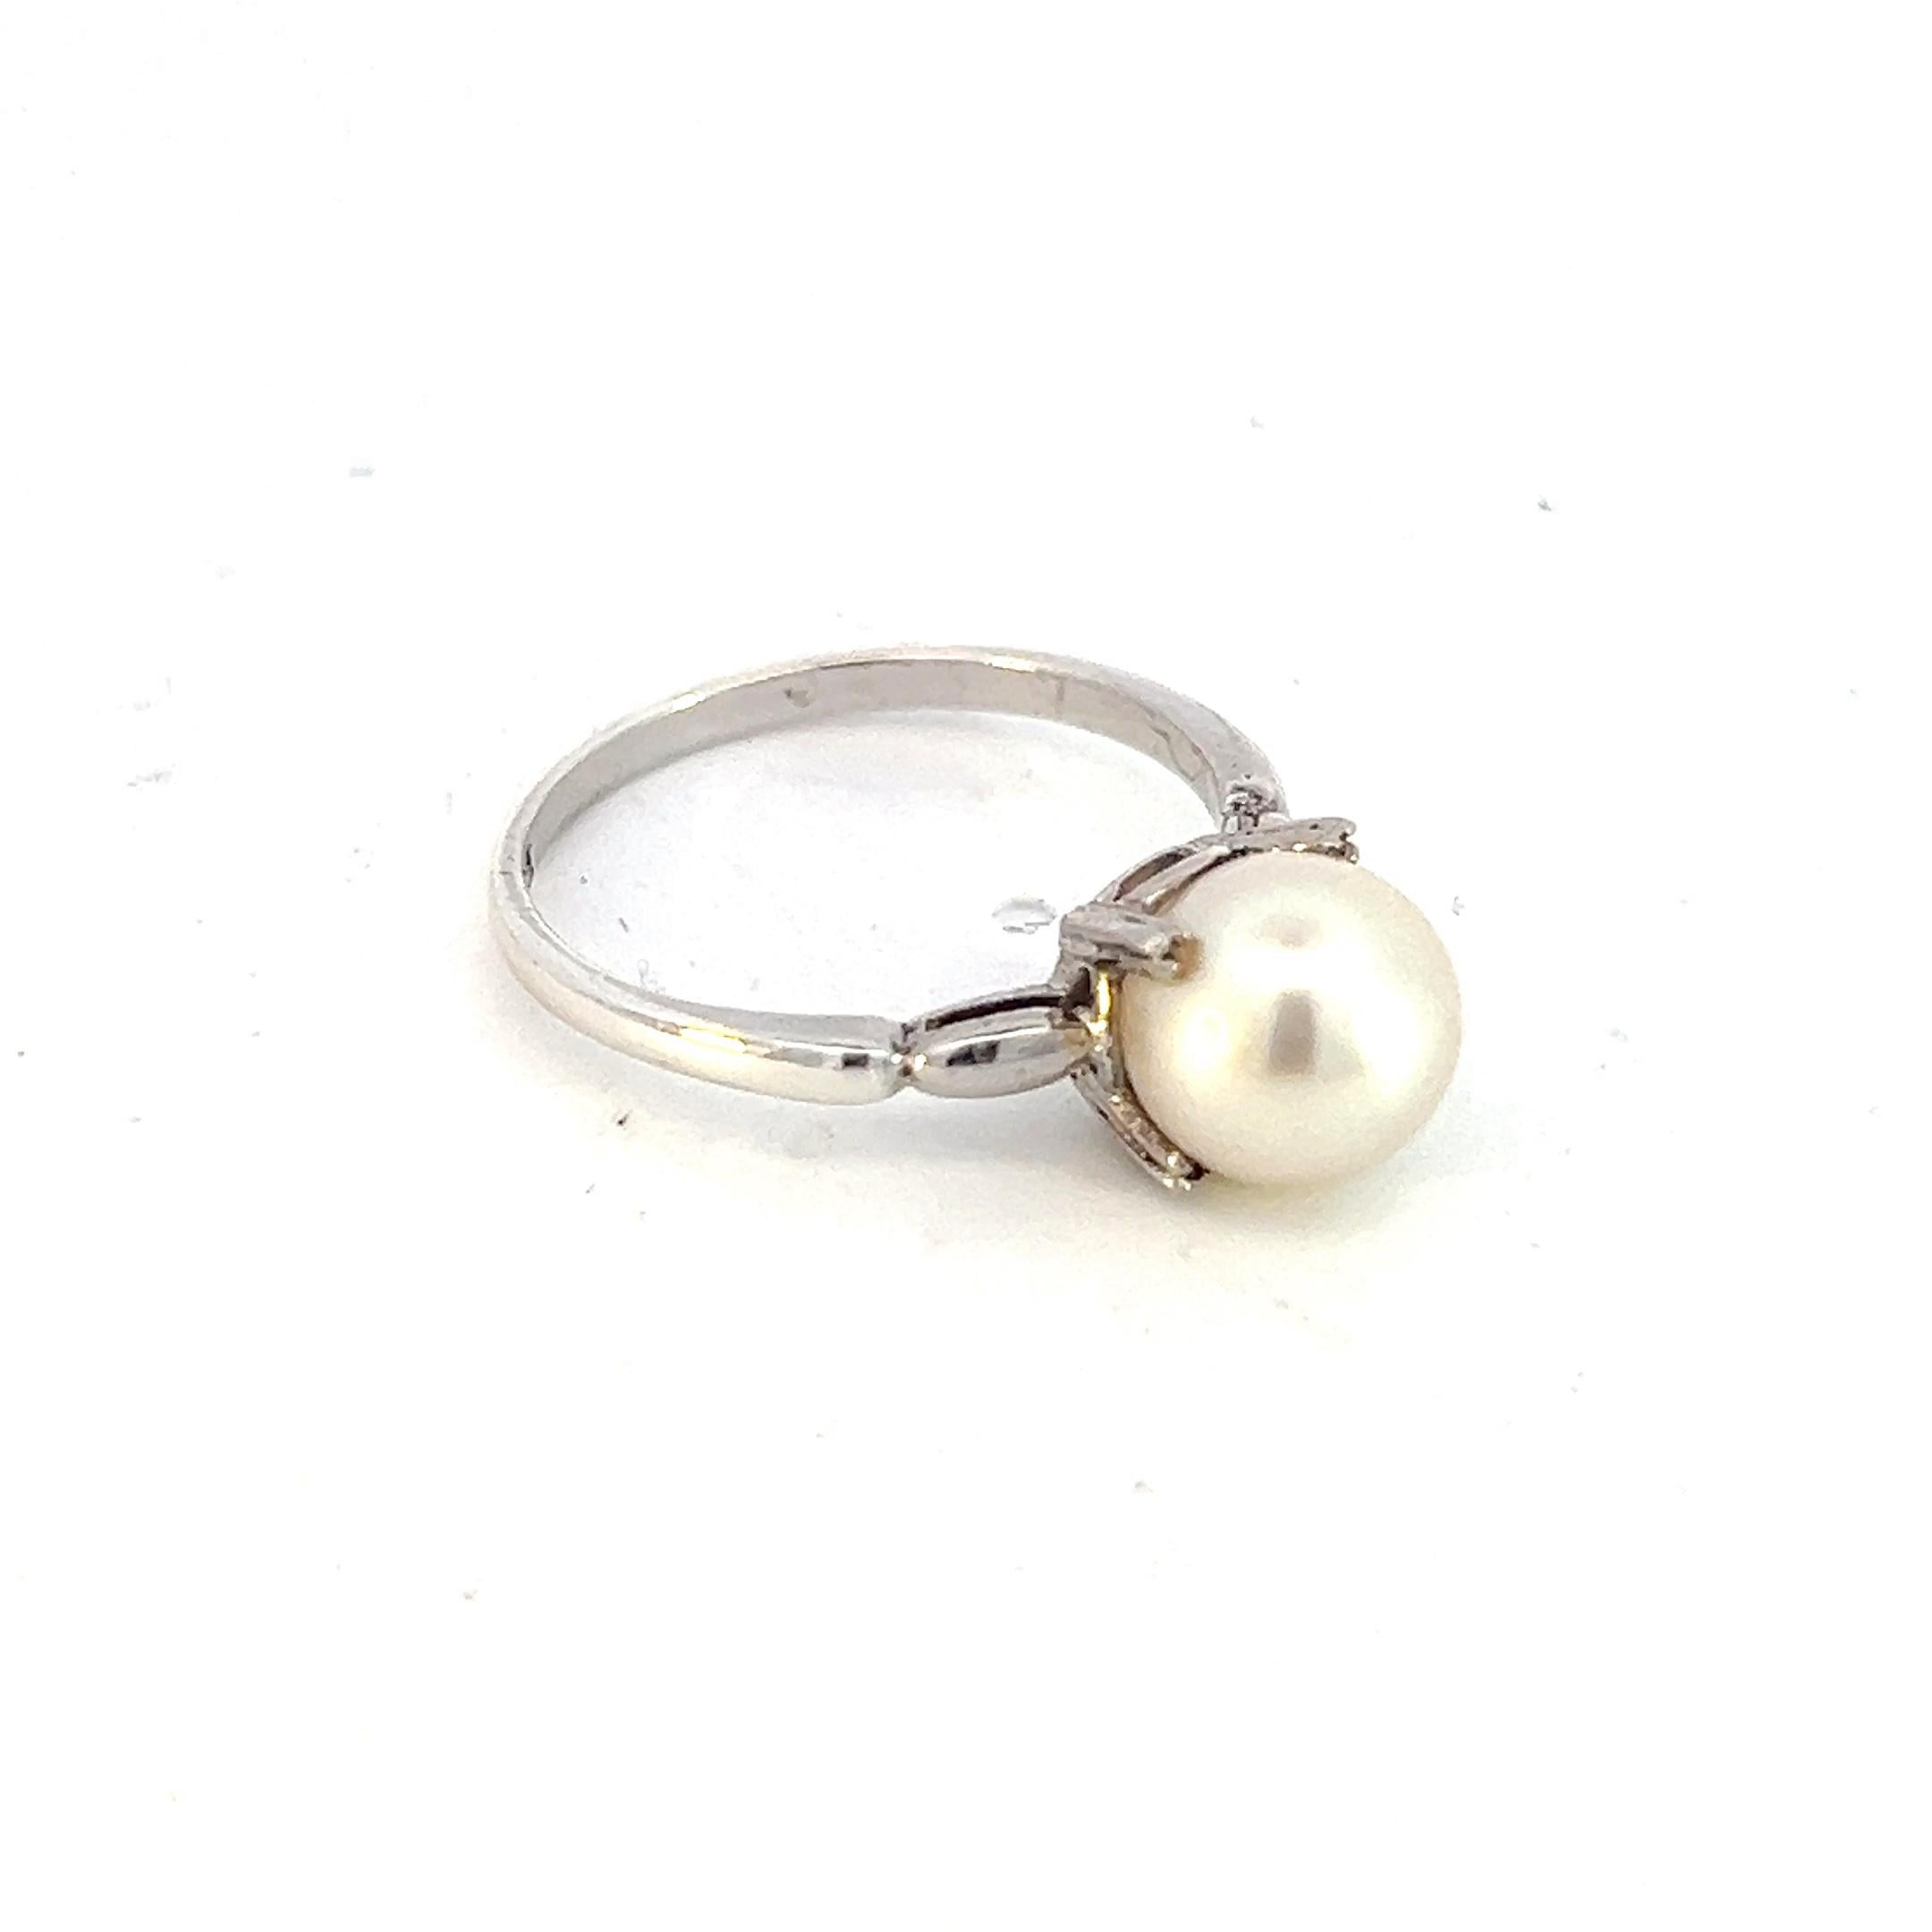 Mikimoto Estate Akoya Pearl Ring 6.5 Silver 7.80 mm M354

TRUSTED SELLER SINCE 2002

PLEASE SEE OUR HUNDREDS OF POSITIVE FEEDBACKS FROM OUR CLIENTS!!

FREE SHIPPING

This elegant Authentic Mikimoto sterling silver ring has 1 Saltwater Akoya Cultured